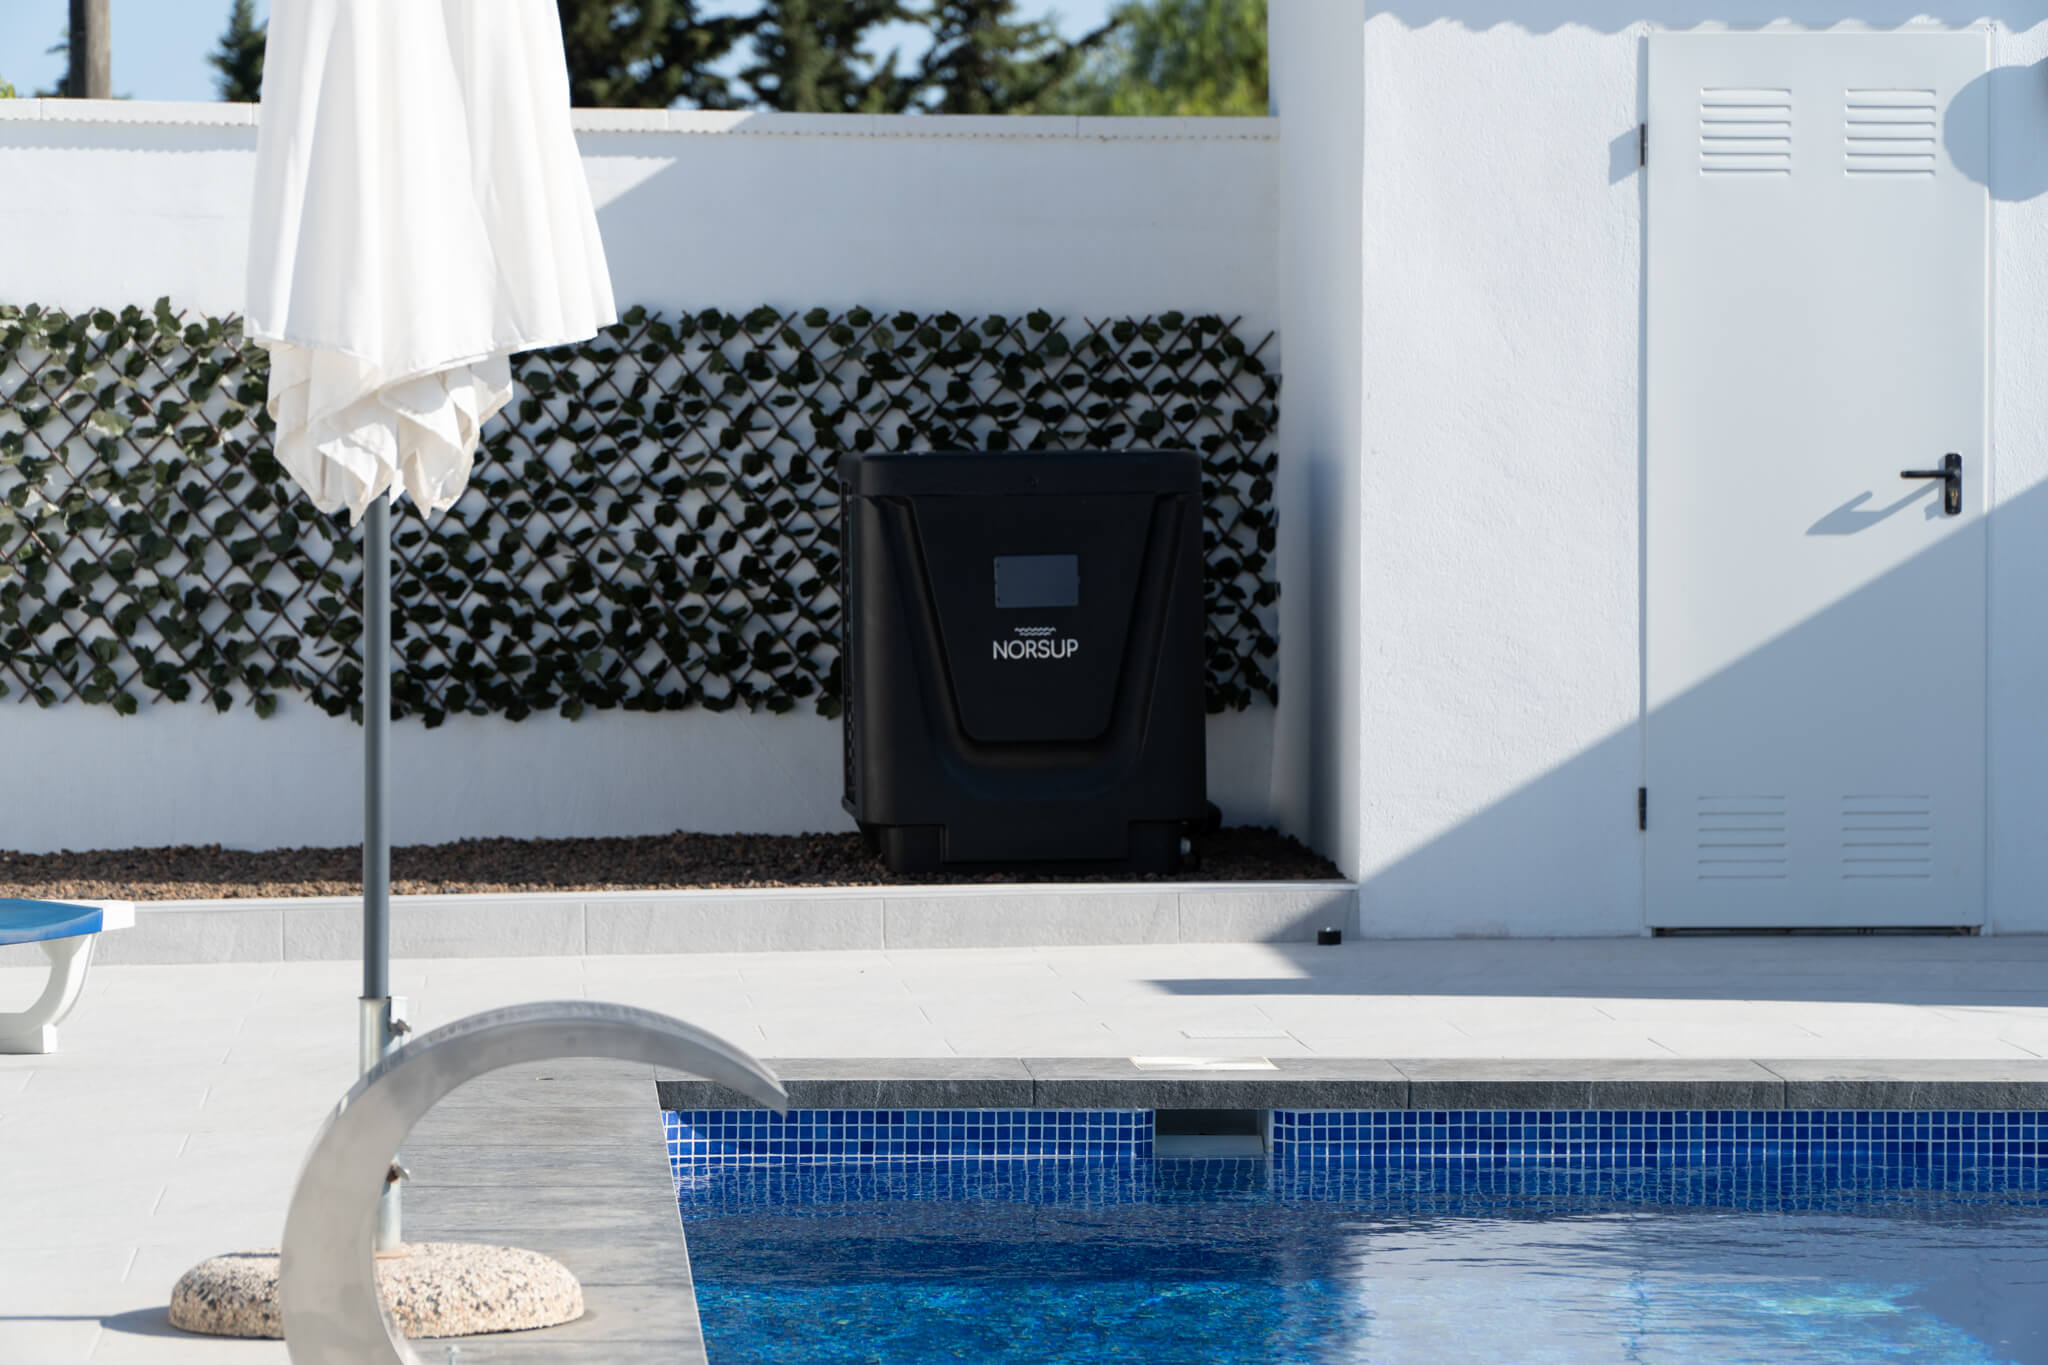 Norsup Vertical Heat pump next to a swimming pool